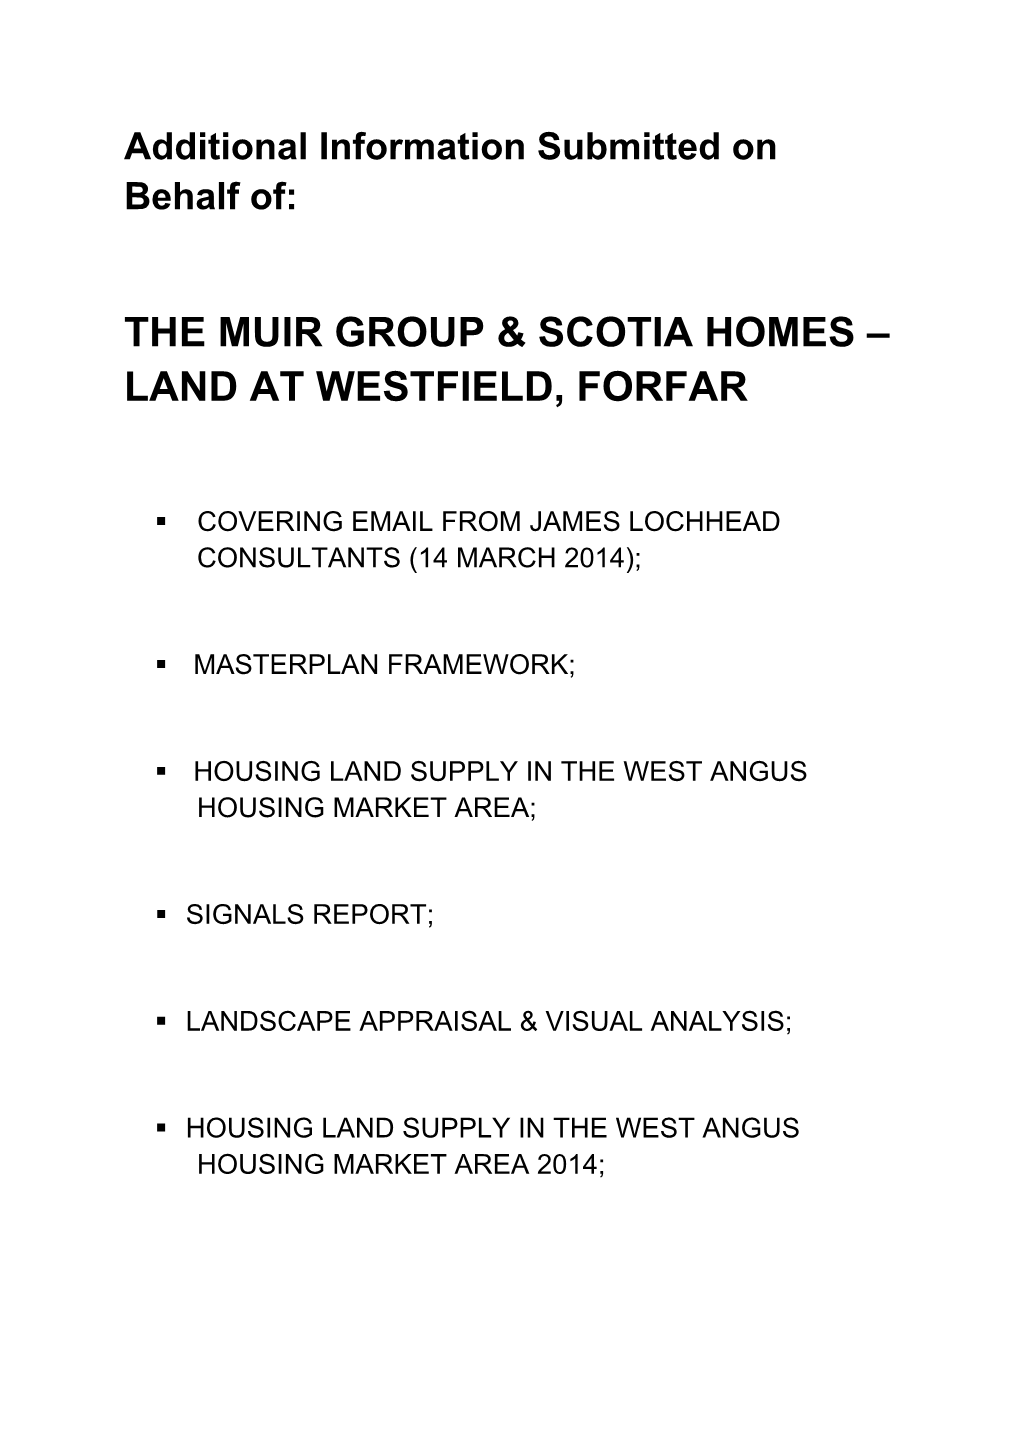 The Muir Group and Scotia Homes